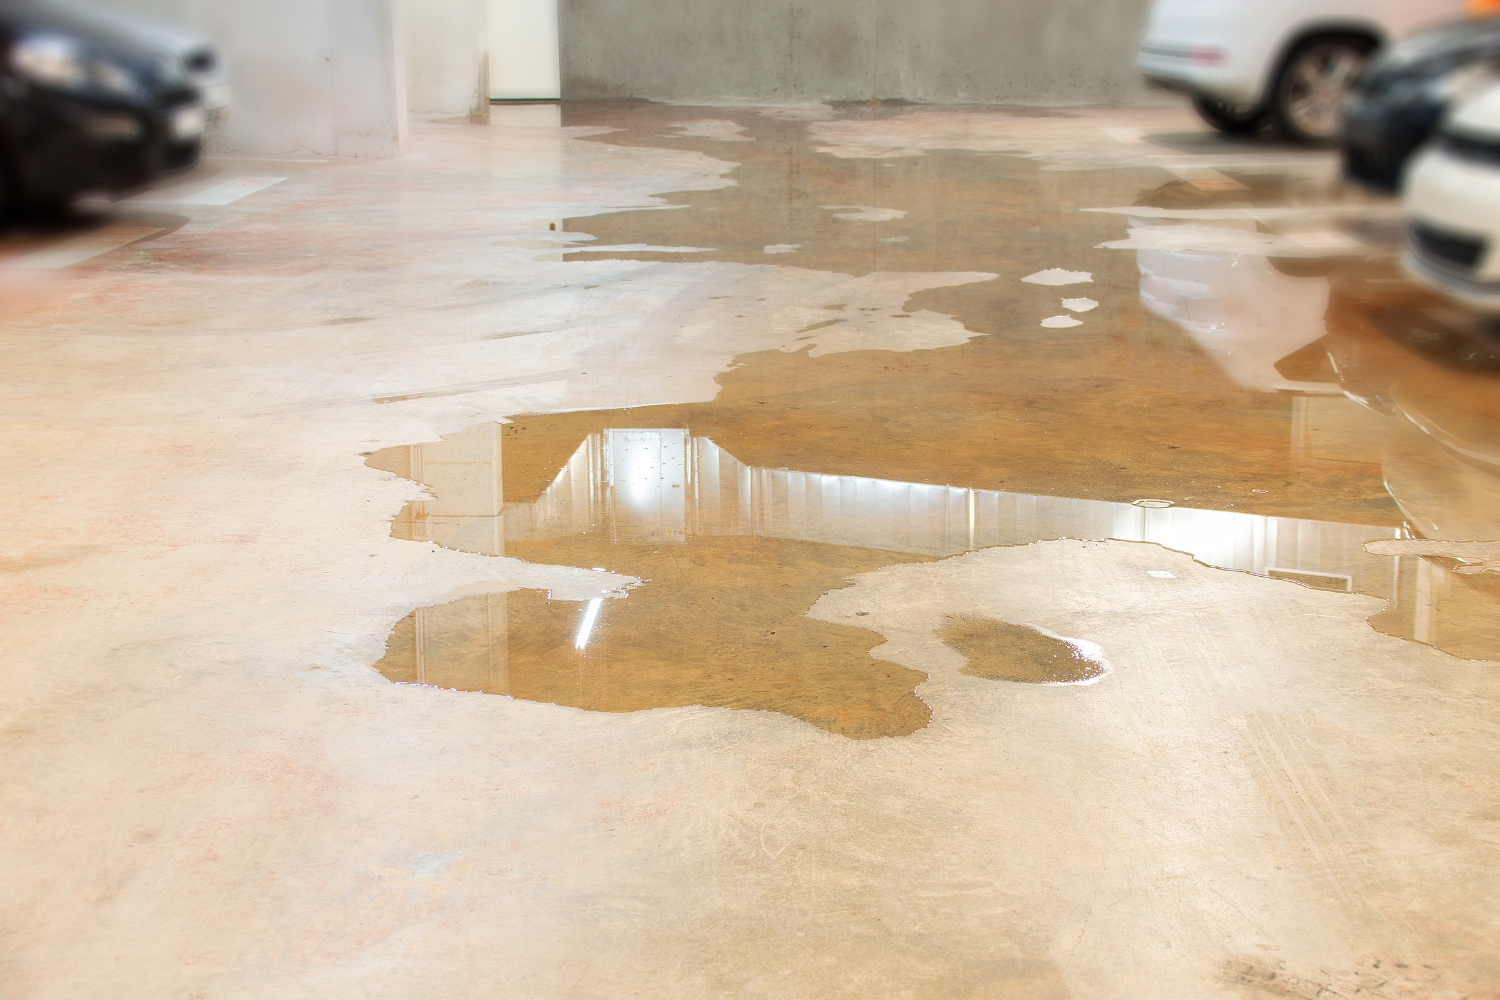 An image of spilled water damage on a garage floor